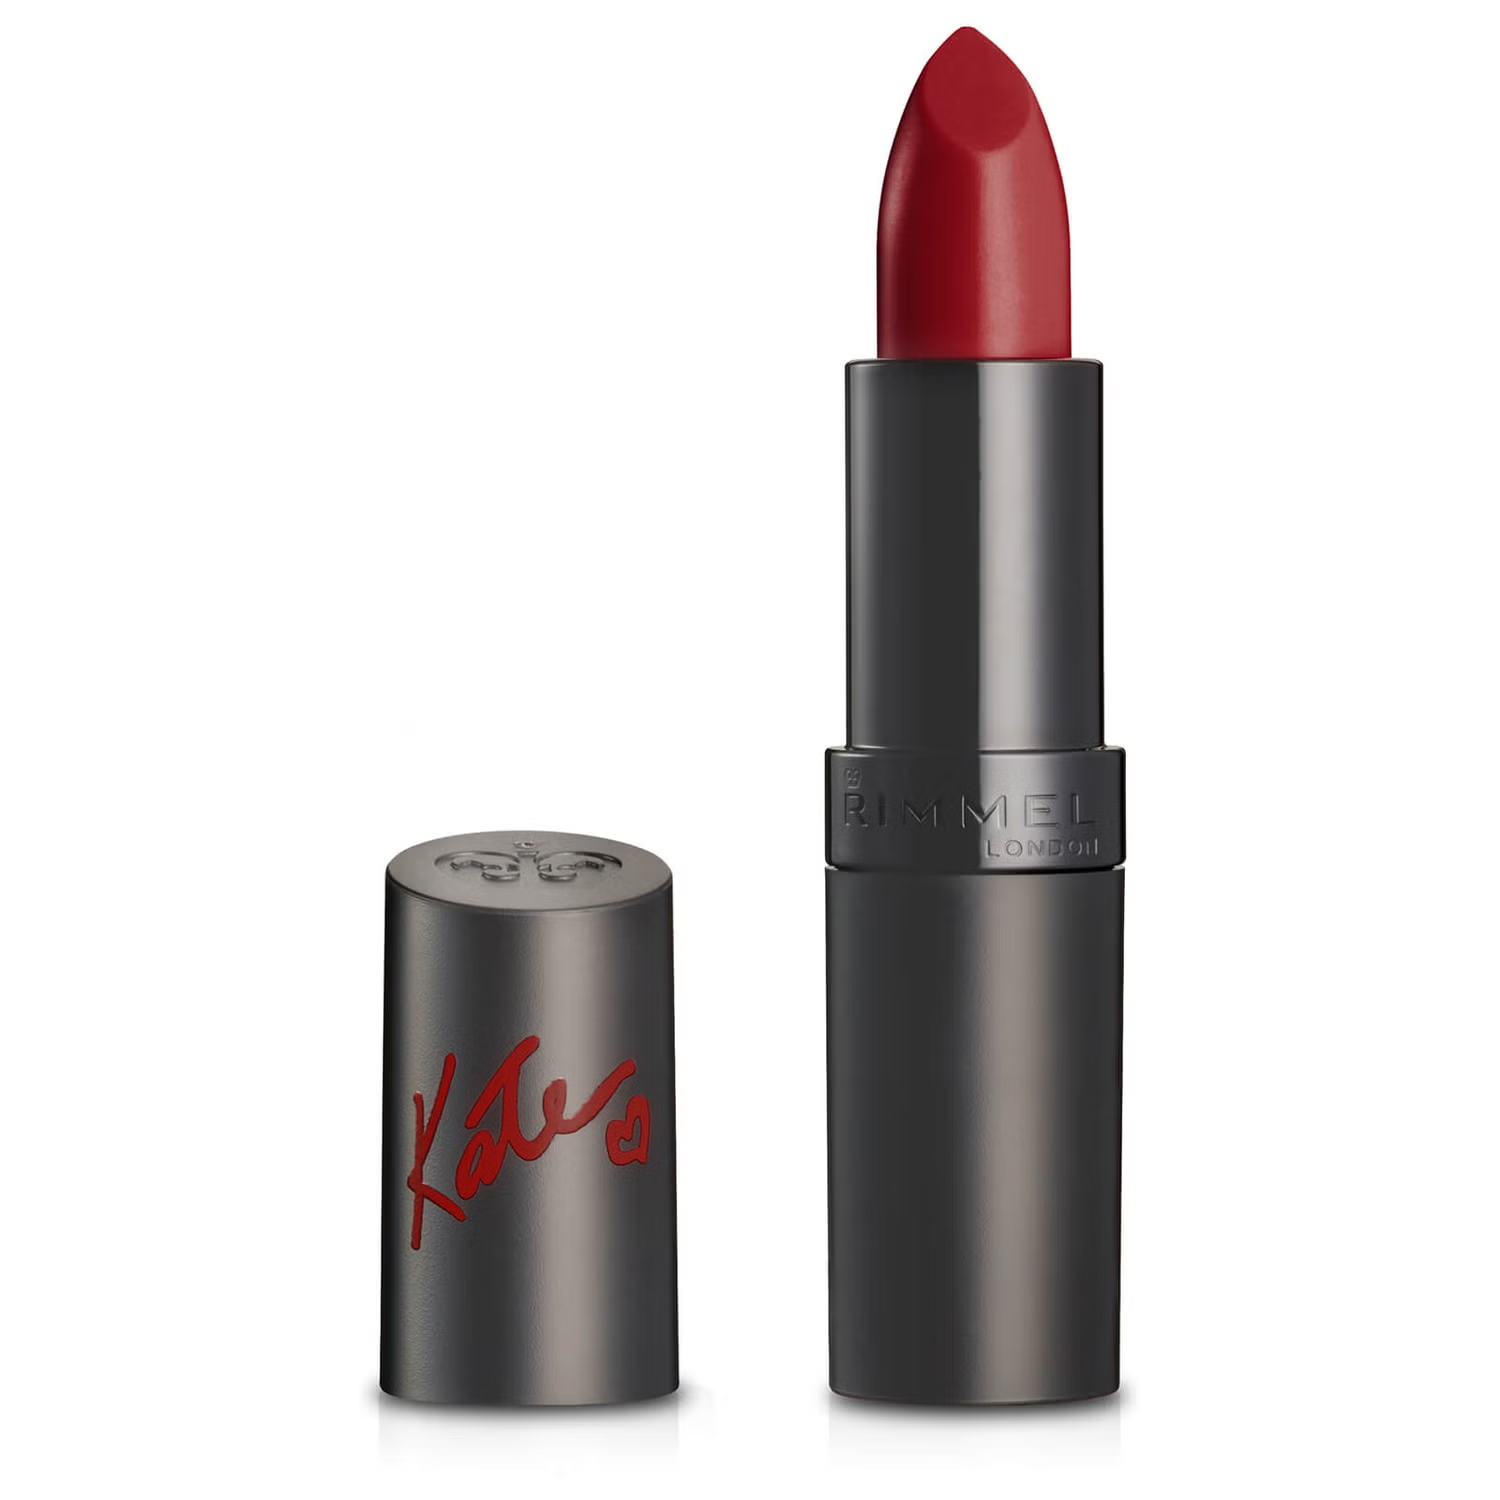 Unveil Glamour This Holiday Season with Rimmel Lasting Finish Lipstick: The Iconic Red for Festive Elegance